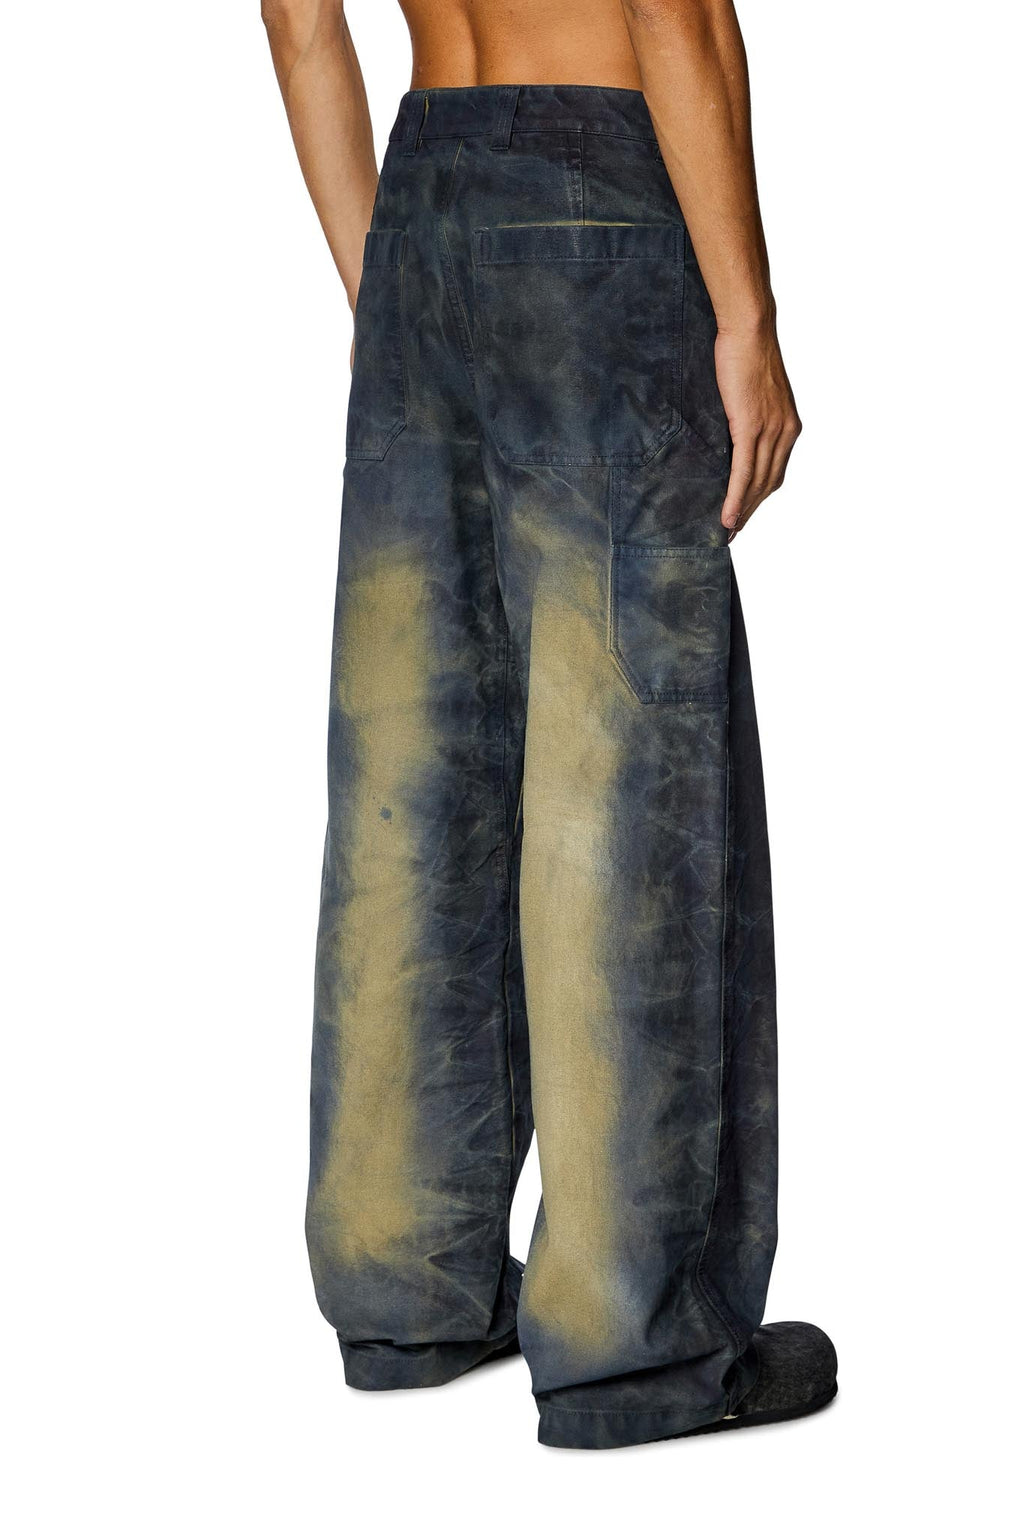 Diesel P-Livery Trousers